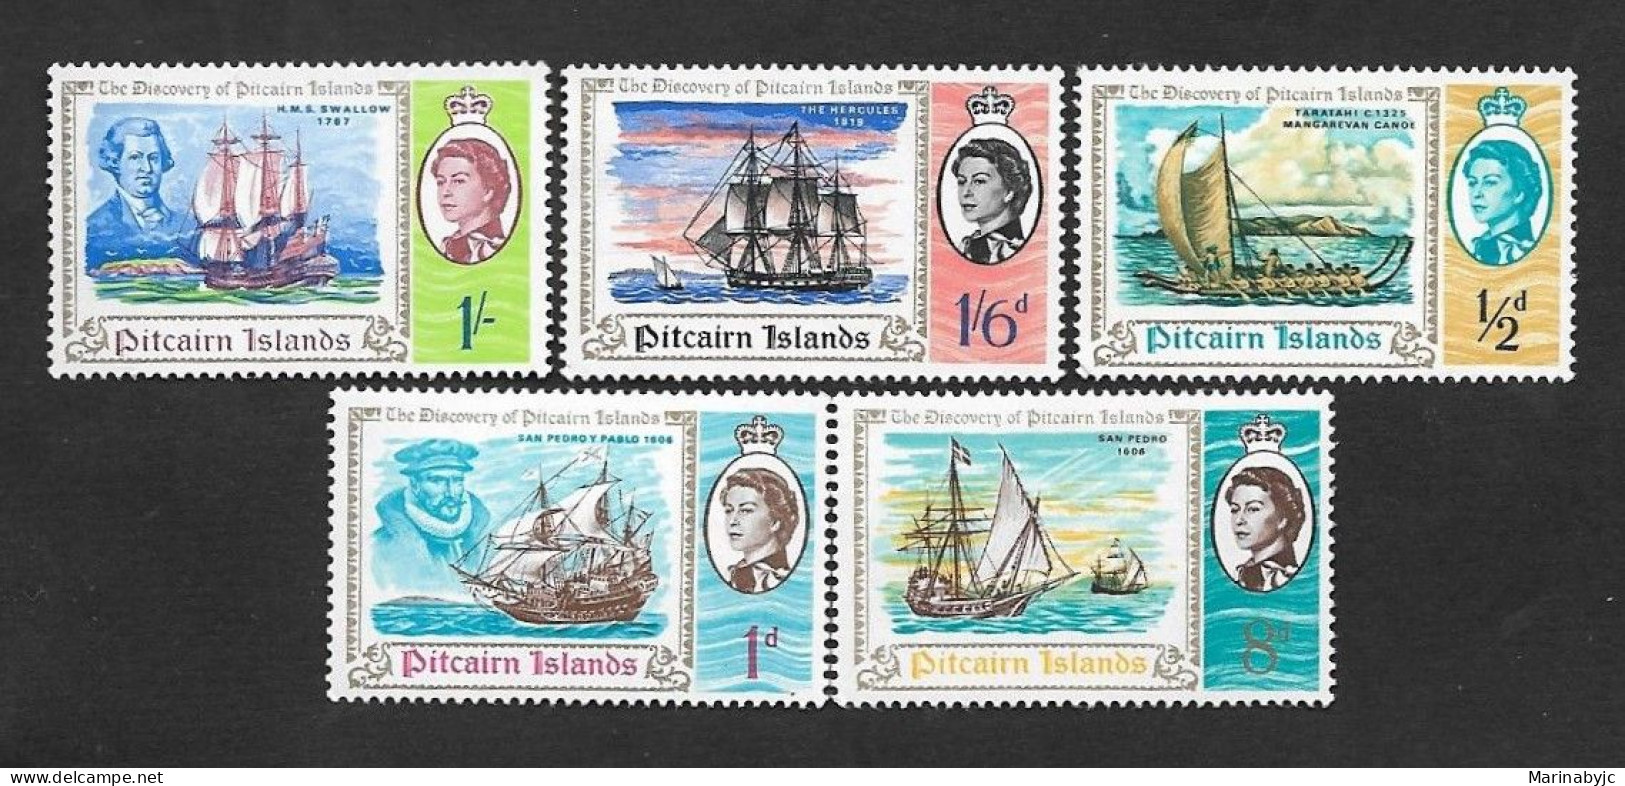 SE)1967 PITCAIRN ISLANDS, BICENTENARY OF THE DISCOVERY OF THE ISLAND BY CAPTAIN PHILIP CARTERET 5 MNH STAMPS - Oceania (Other)